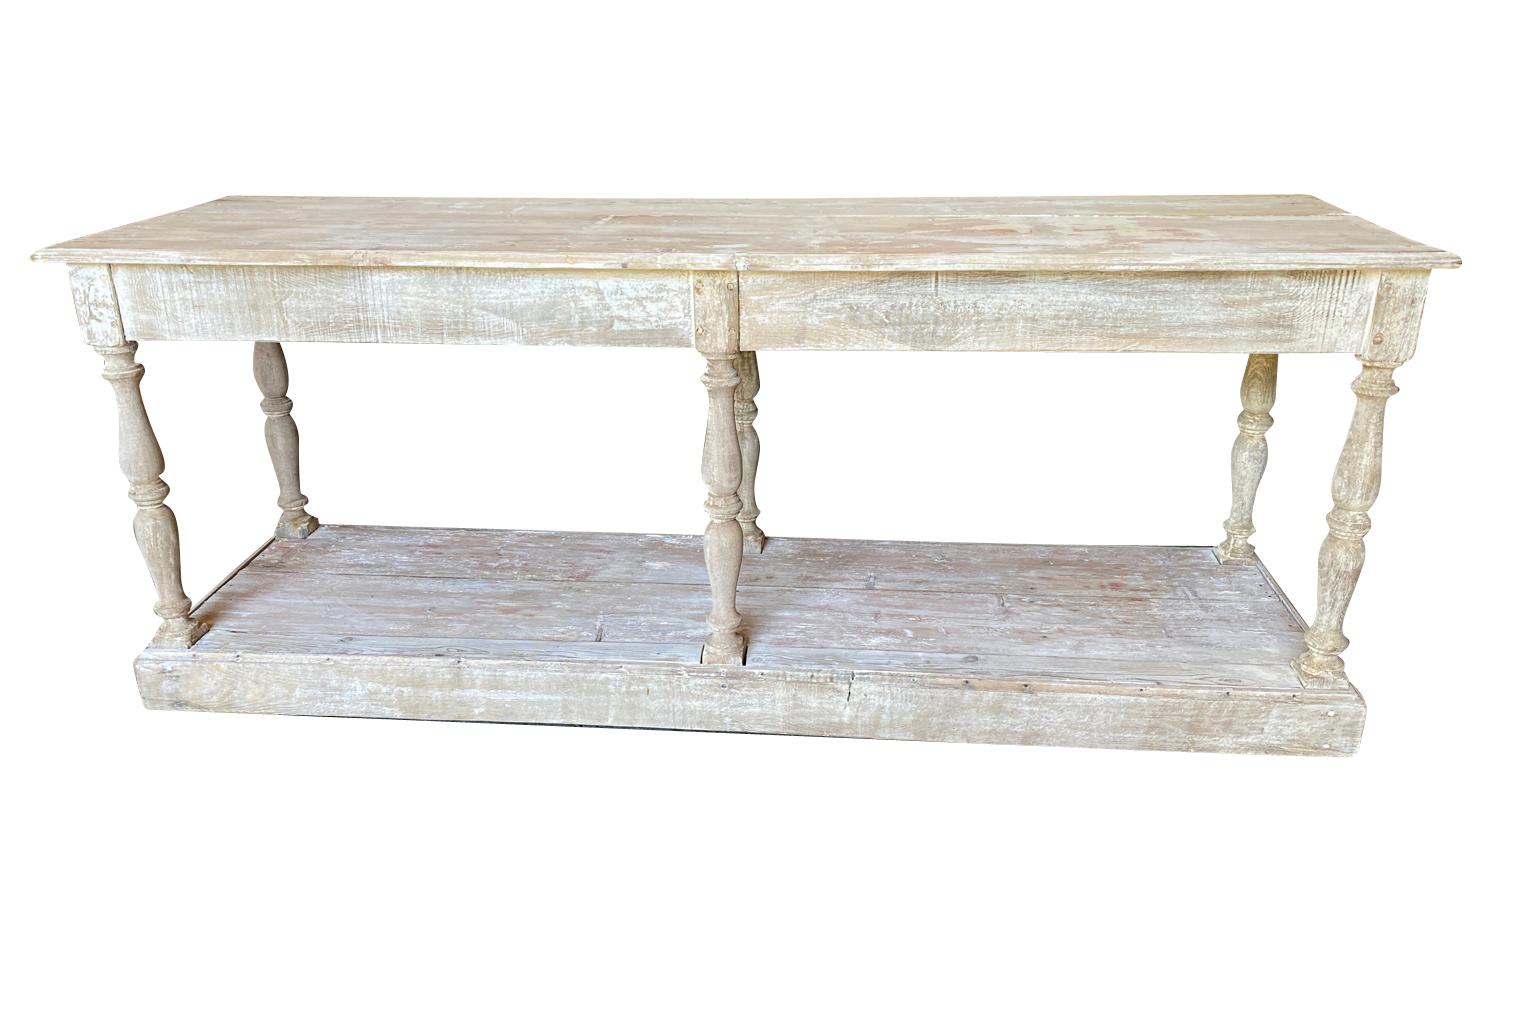 A very charming 19th century Draper's Table from the Provence region of France.  Soundly constructed from scraped pine with nicely turned legs and a lower shelf.  A wonderful console table or narrow kitchen island.